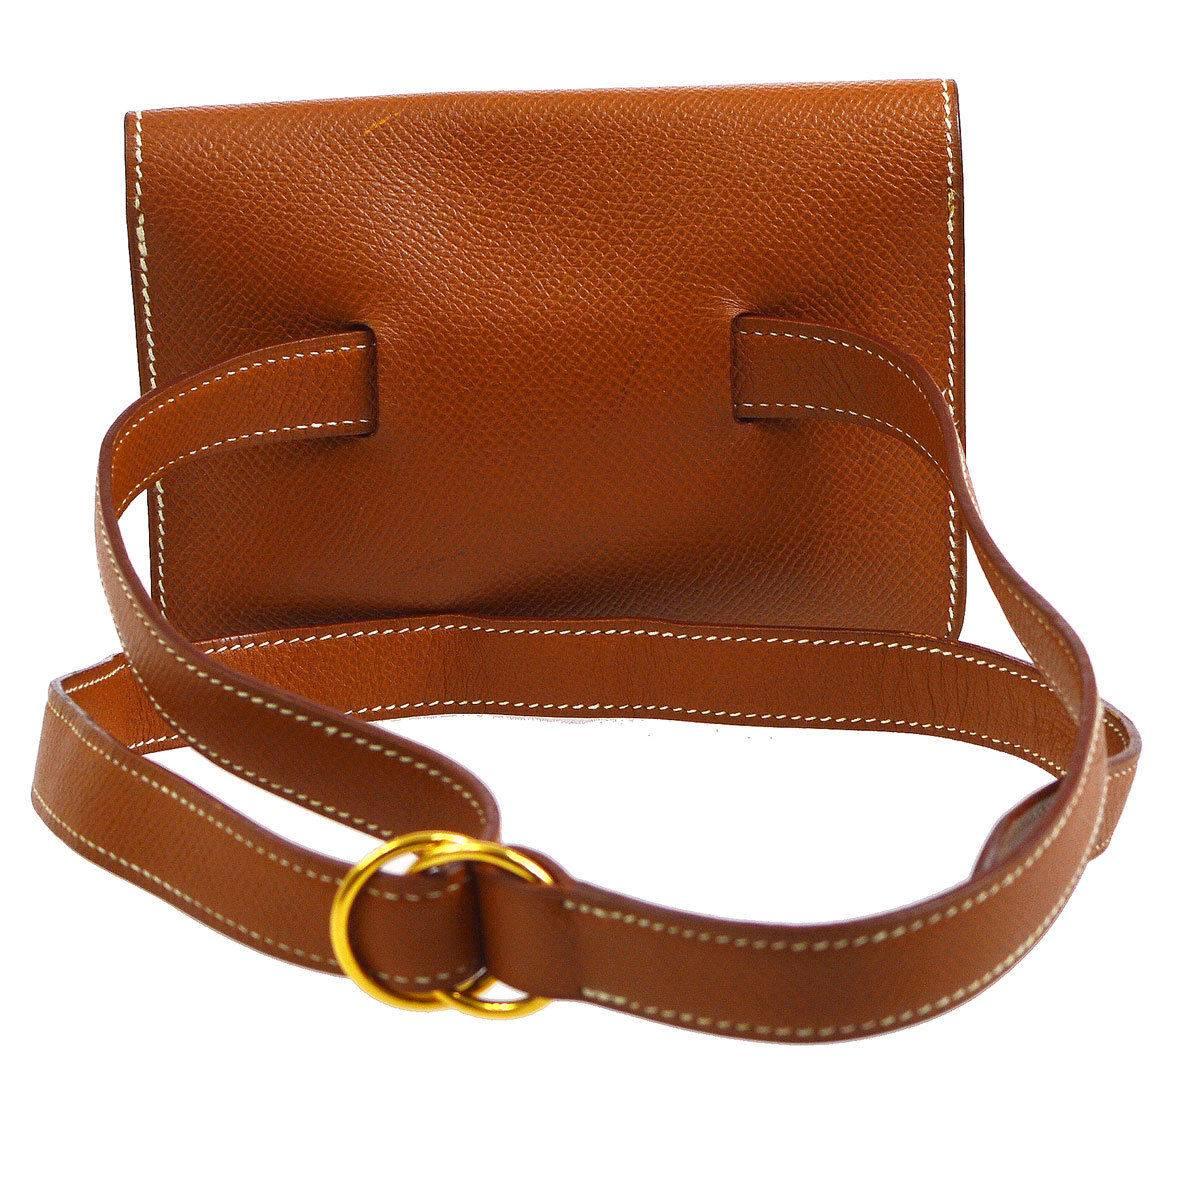 Hermes Cognac Leather Whipstick Flap Fanny Pack Waist Belt Bag

Leather
Leather lining
Gold tone hardware
Date code present
Made in France
Waist belt length 39.5